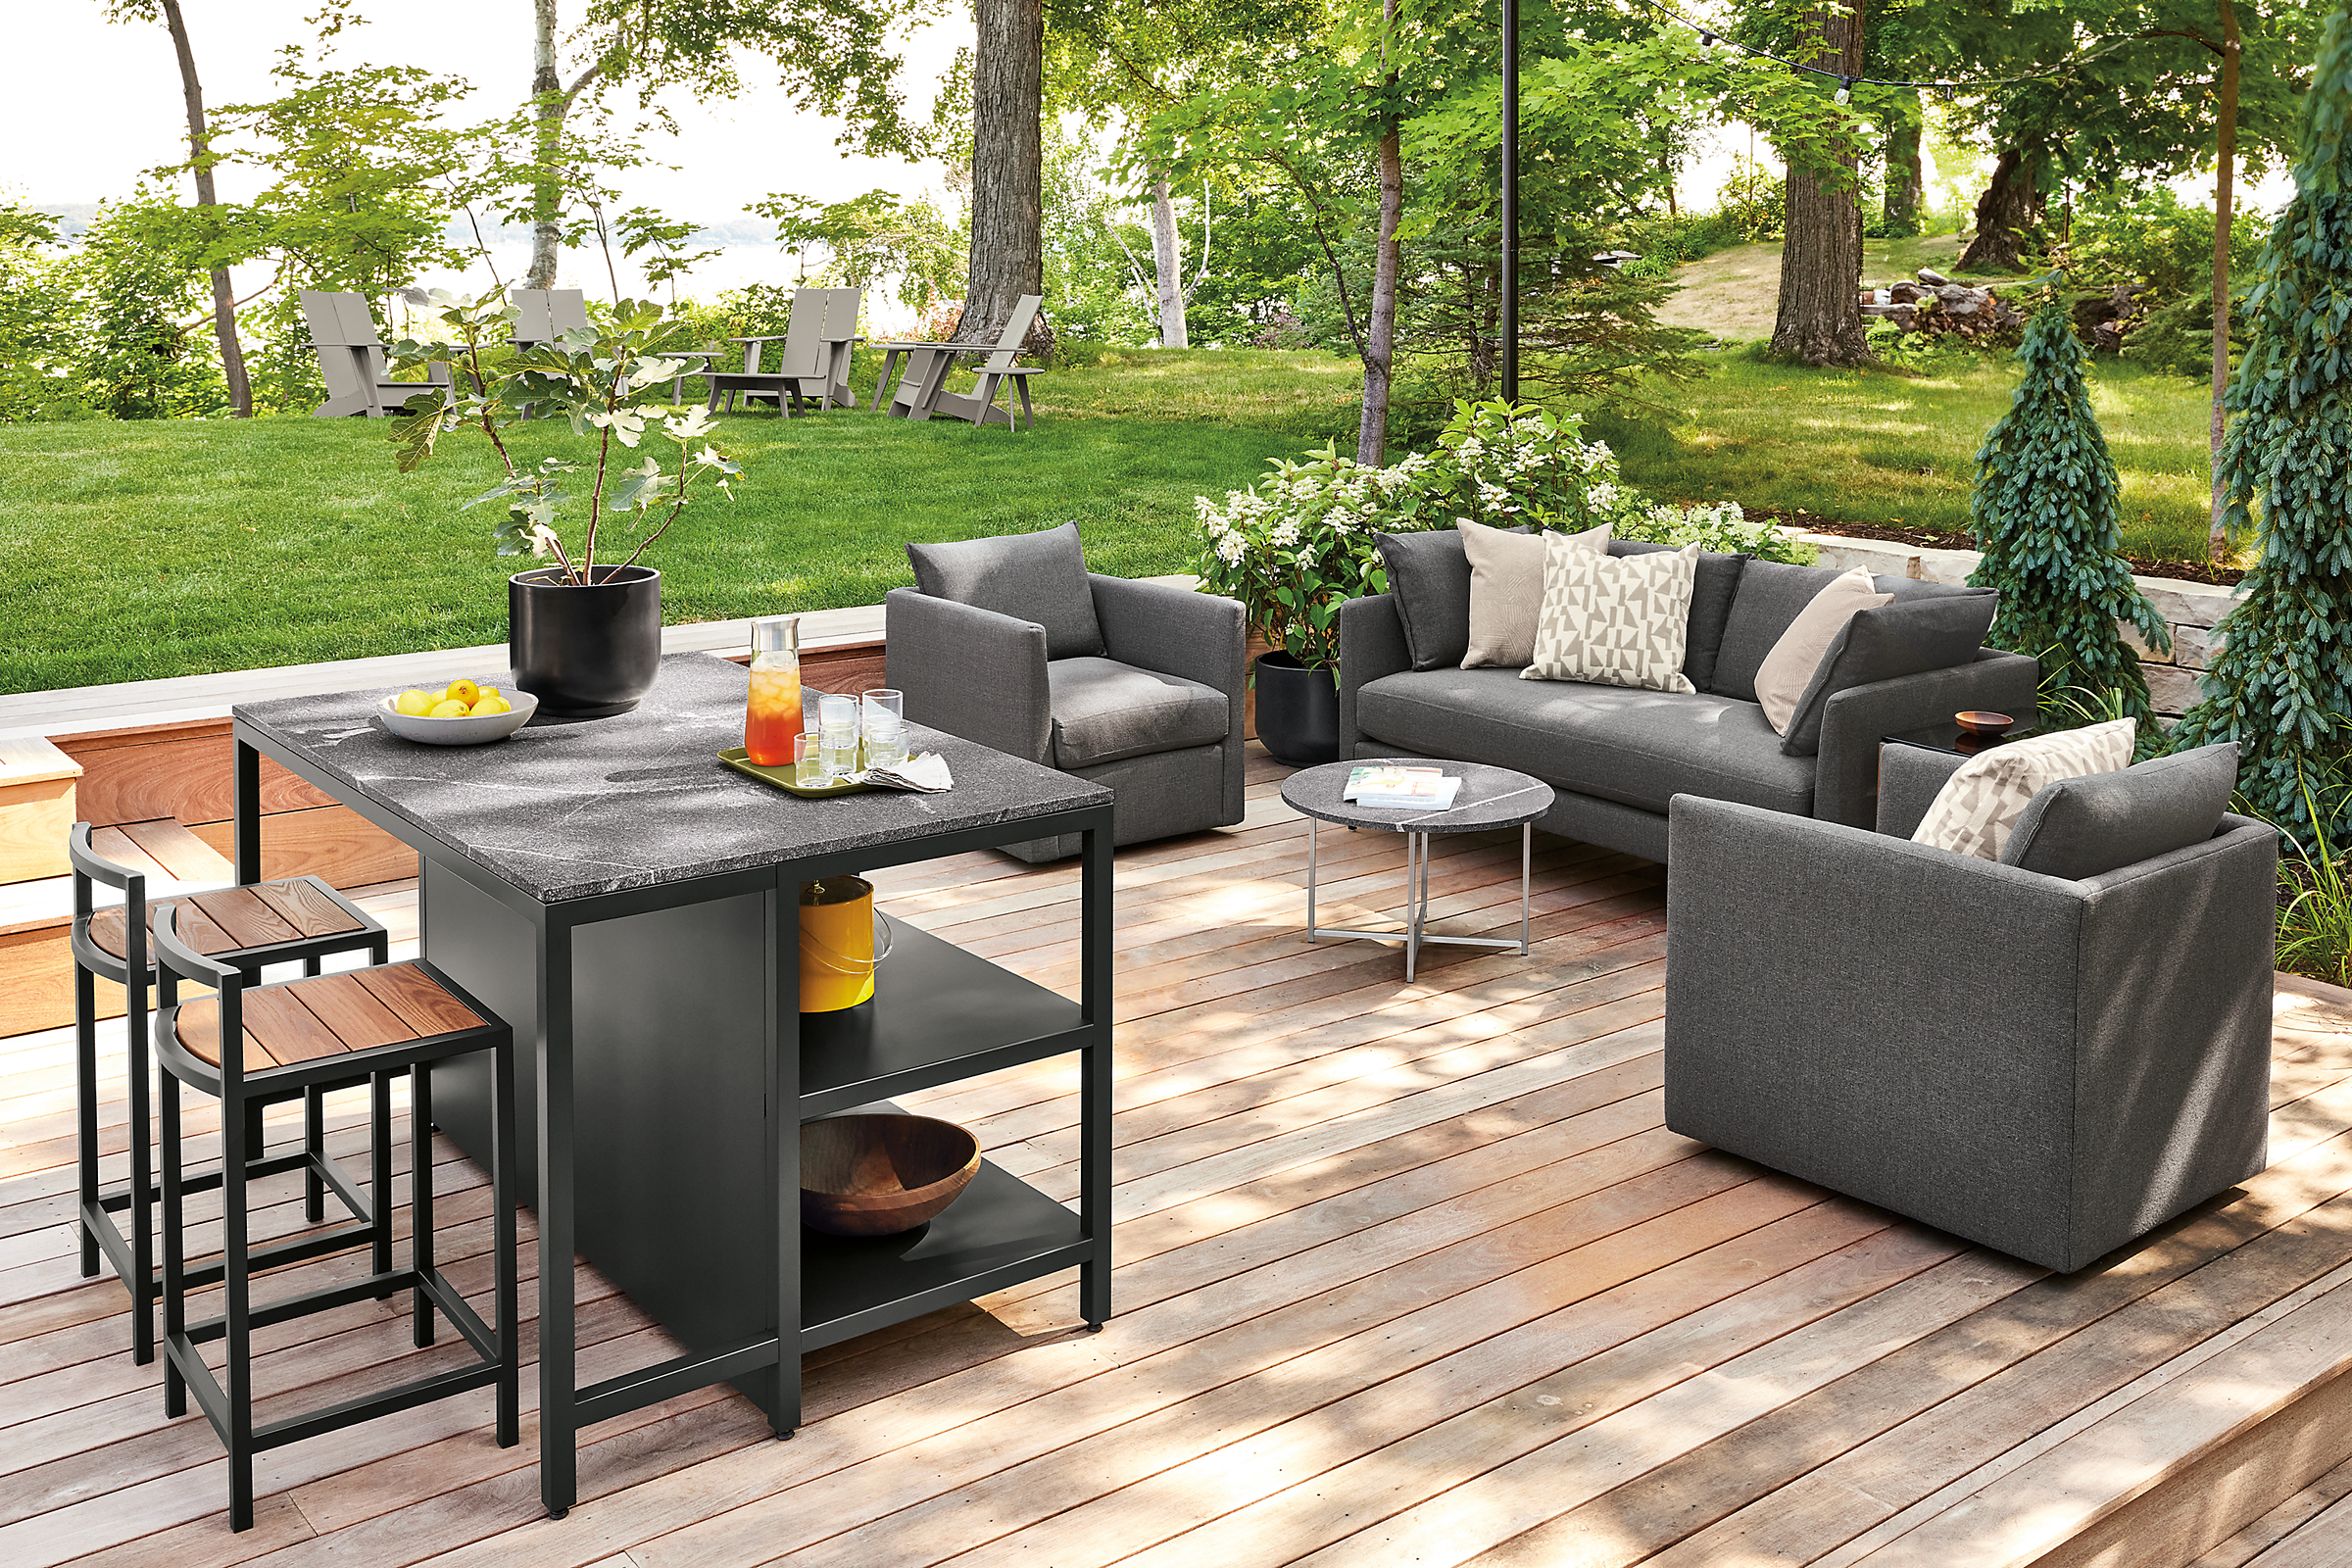 Outdoor space with parsons outdoor counter table, montego stools, palm lounge furniture.